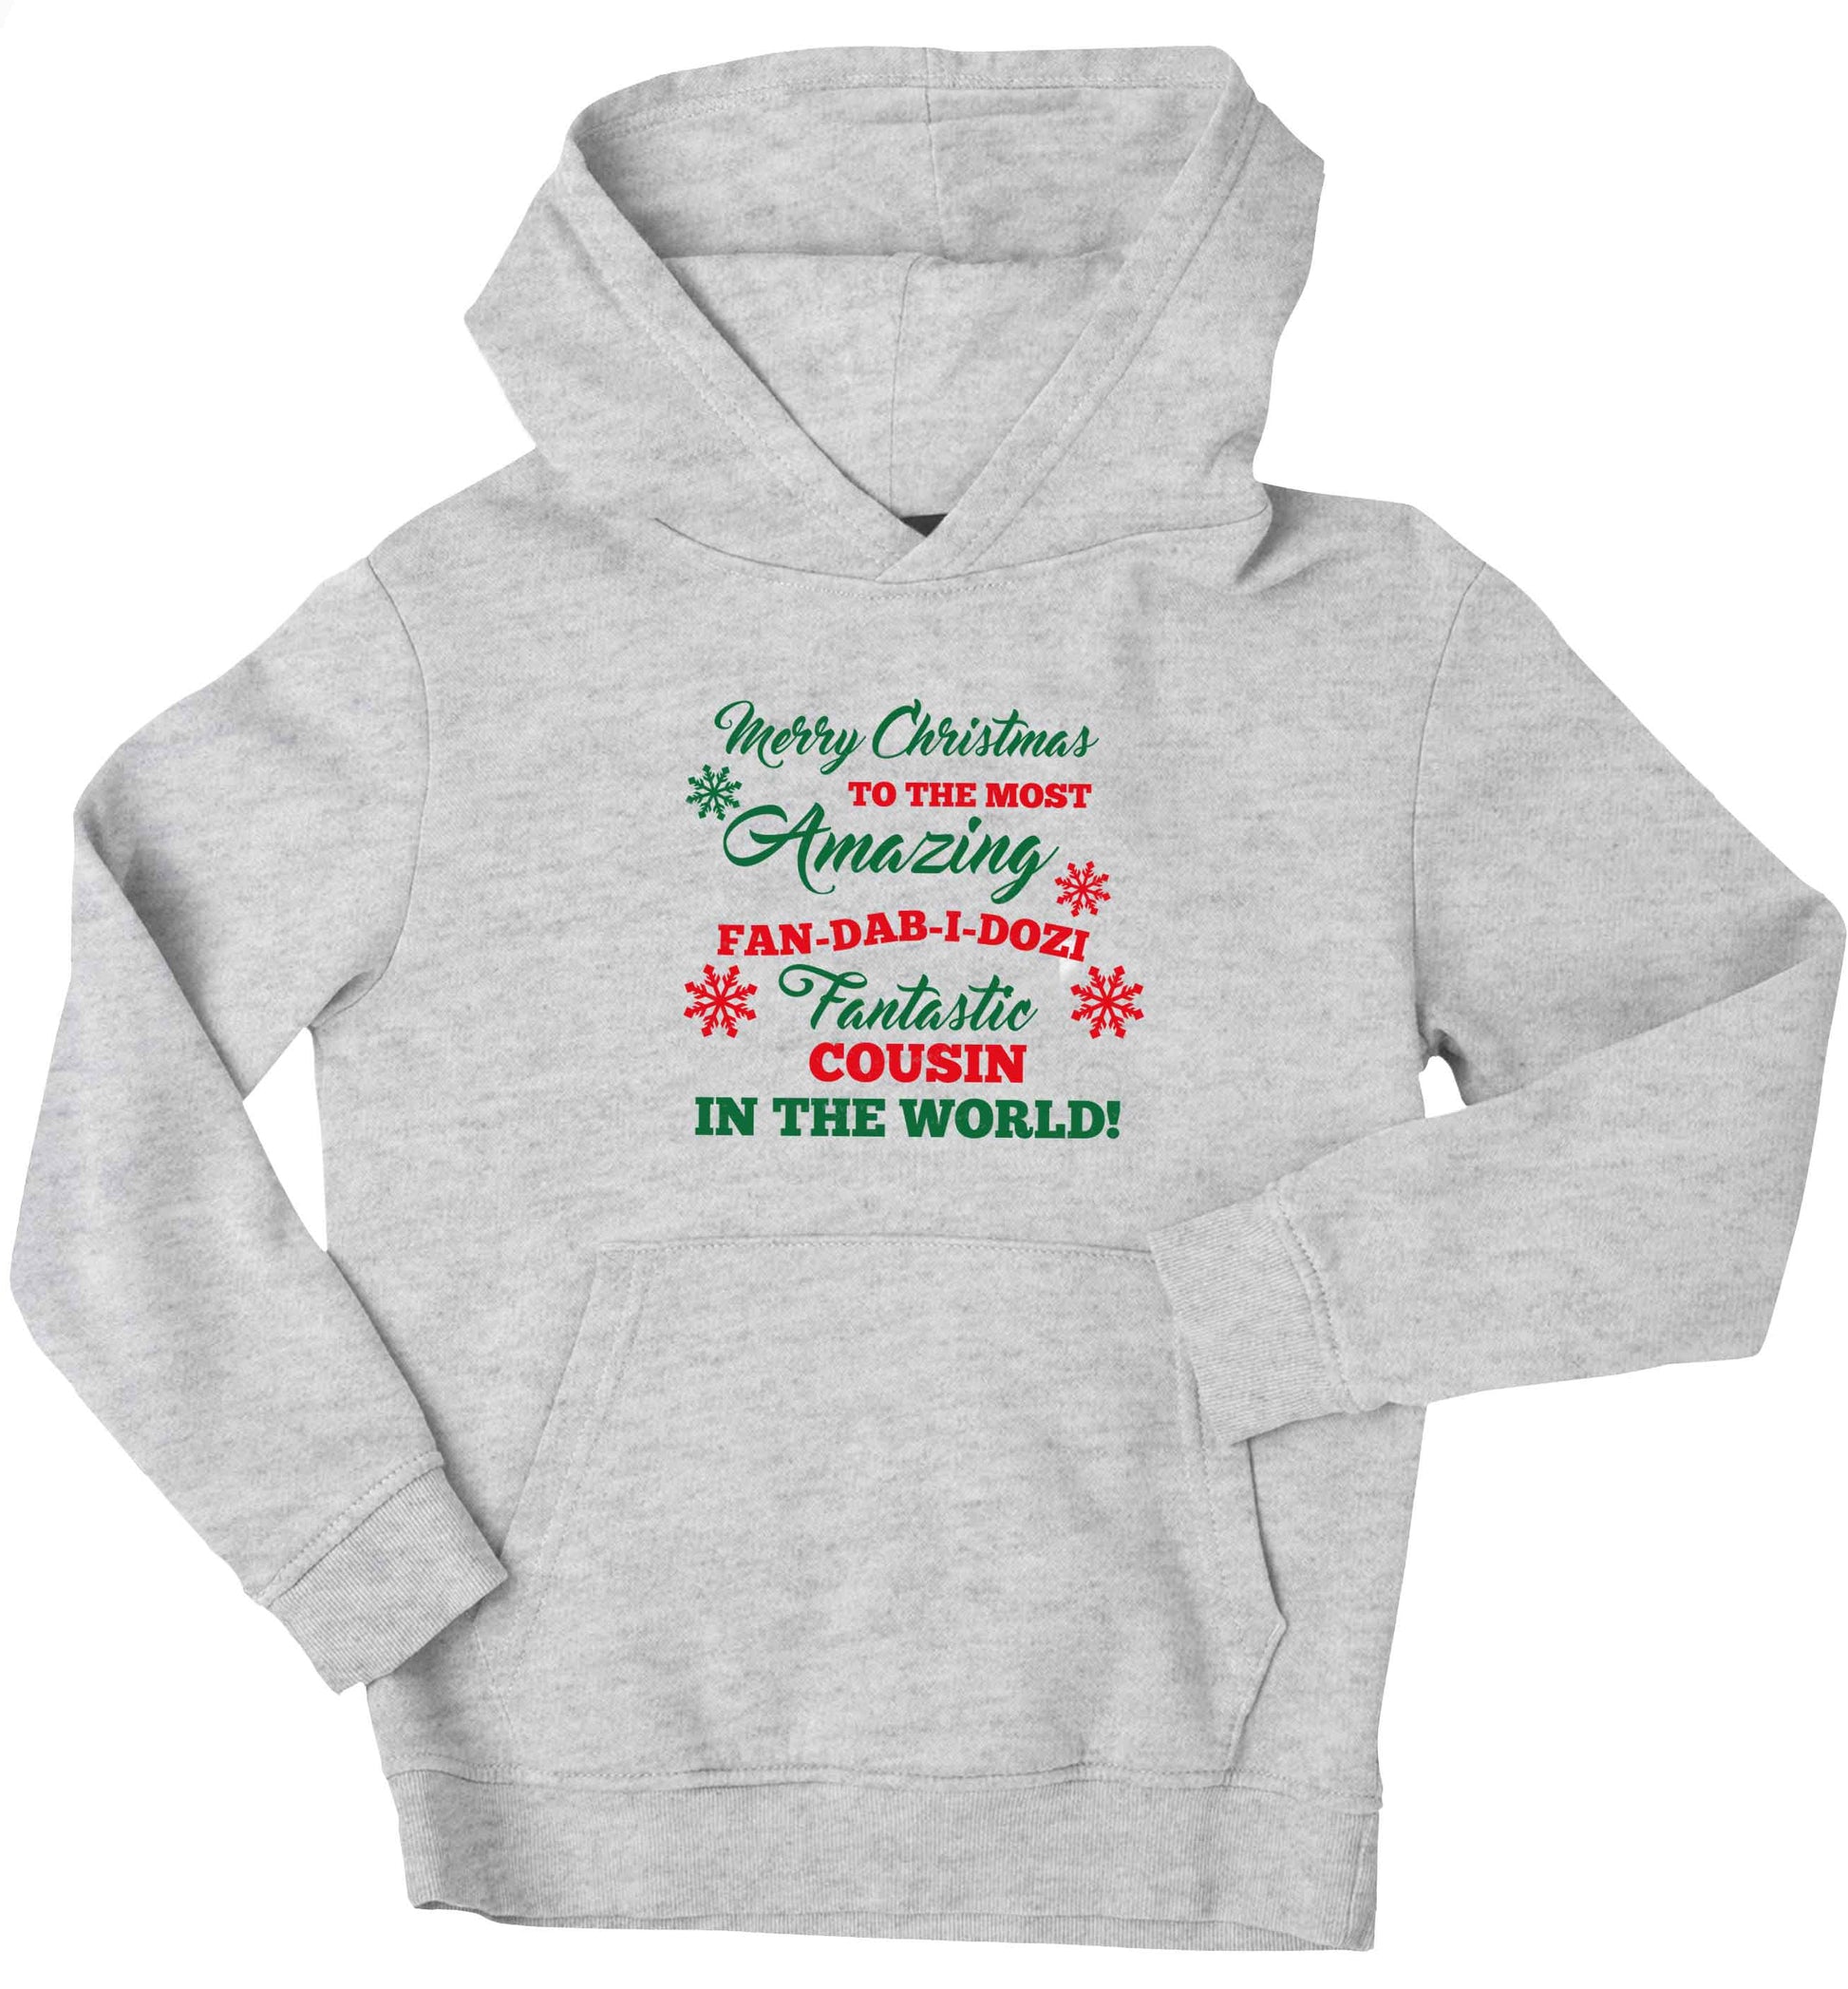 Merry Christmas to the most amazing fan-dab-i-dozi fantasic Cousin in the world children's grey hoodie 12-13 Years